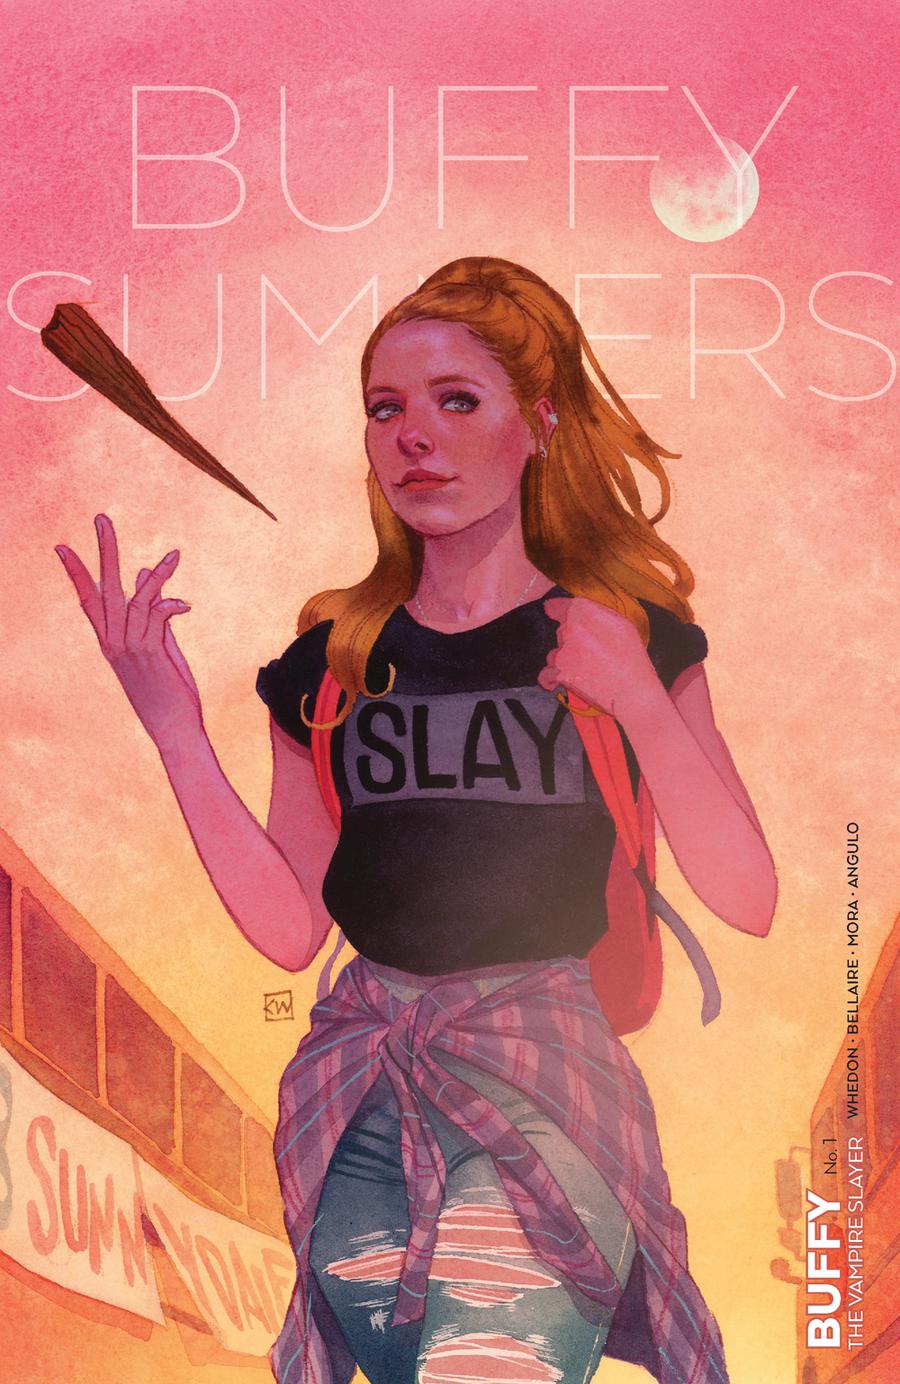 Buffy The Vampire Slayer Vol 2 #1 Cover B Variant Kevin Wada Cover